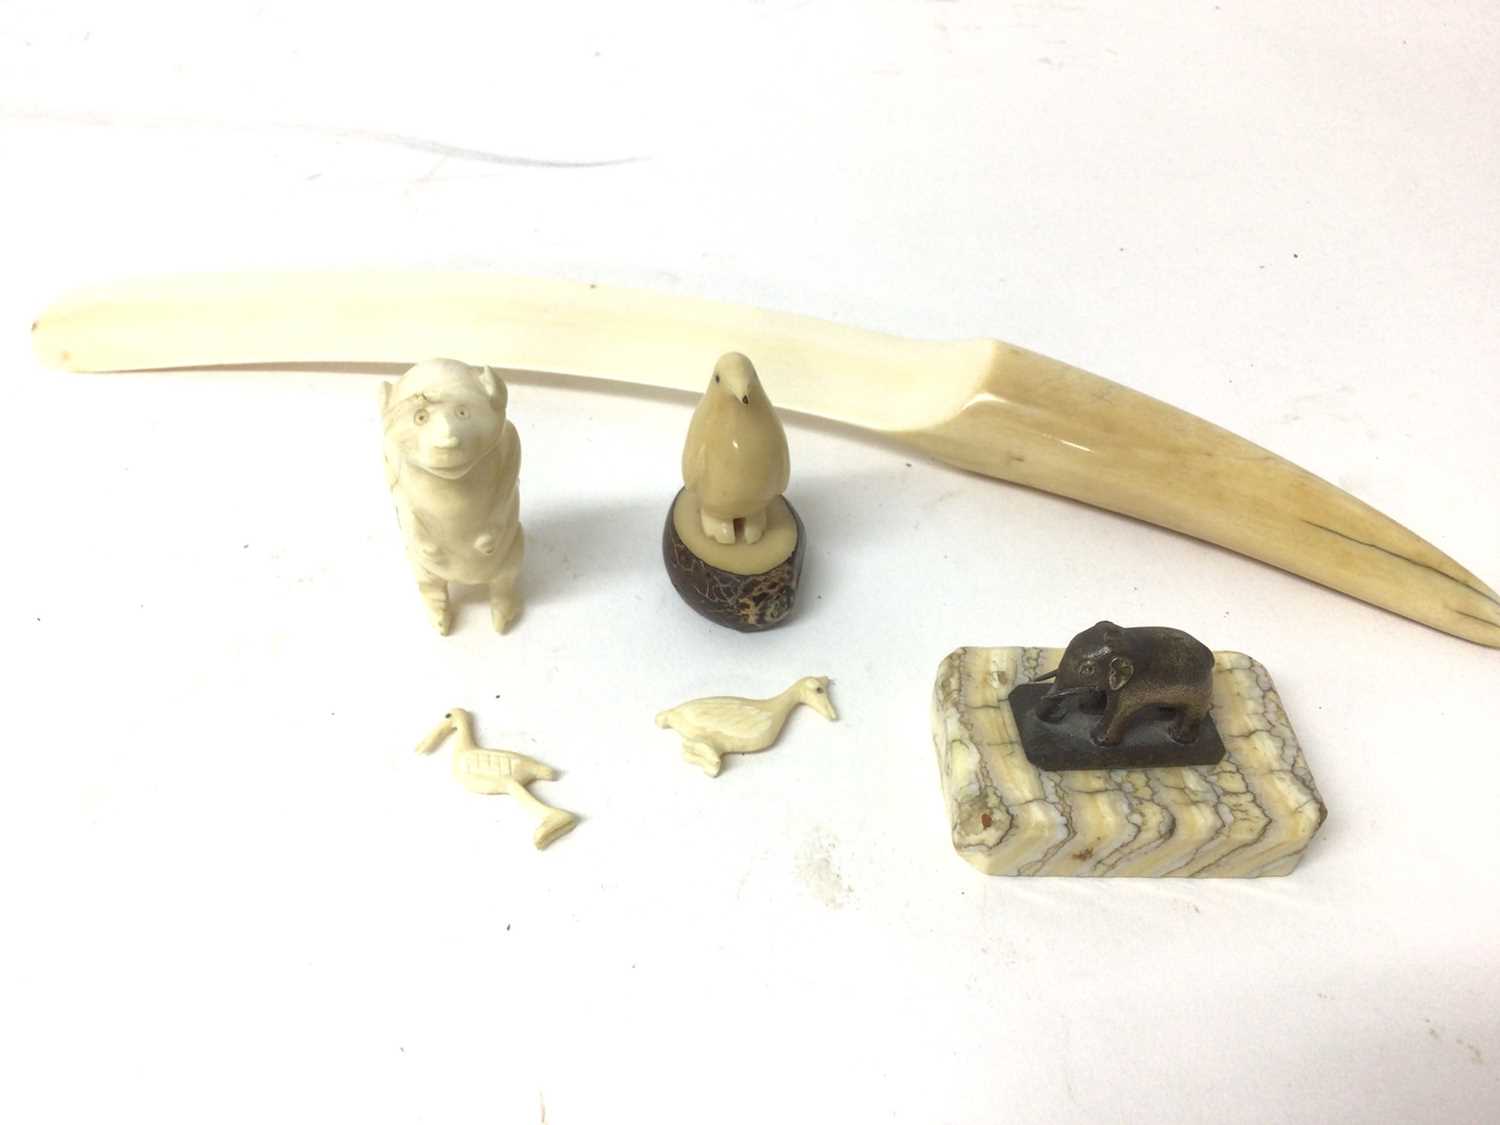 Lot 46 - Group of items to include a fossilised mammoth tooth slab mounted with Indian silver elephant, Victorian ivory letter opener, antique ivory monkey, and a vegetable ivory bird